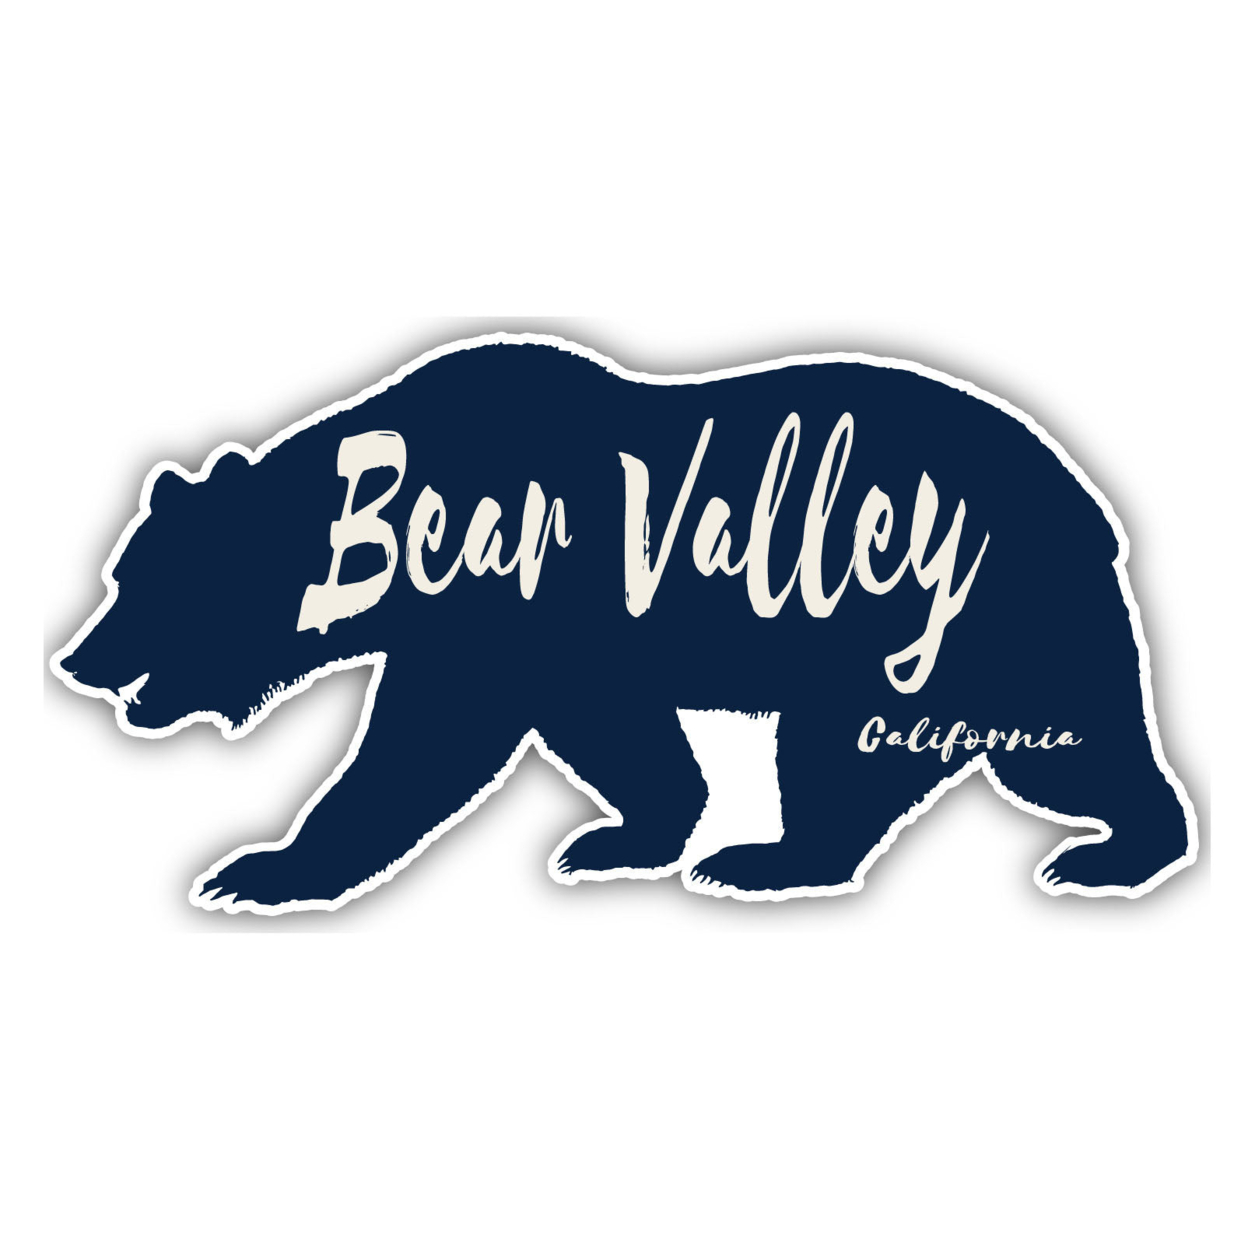 Bear Valley California Souvenir Decorative Stickers (Choose Theme And Size) - 4-Pack, 8-Inch, Bear